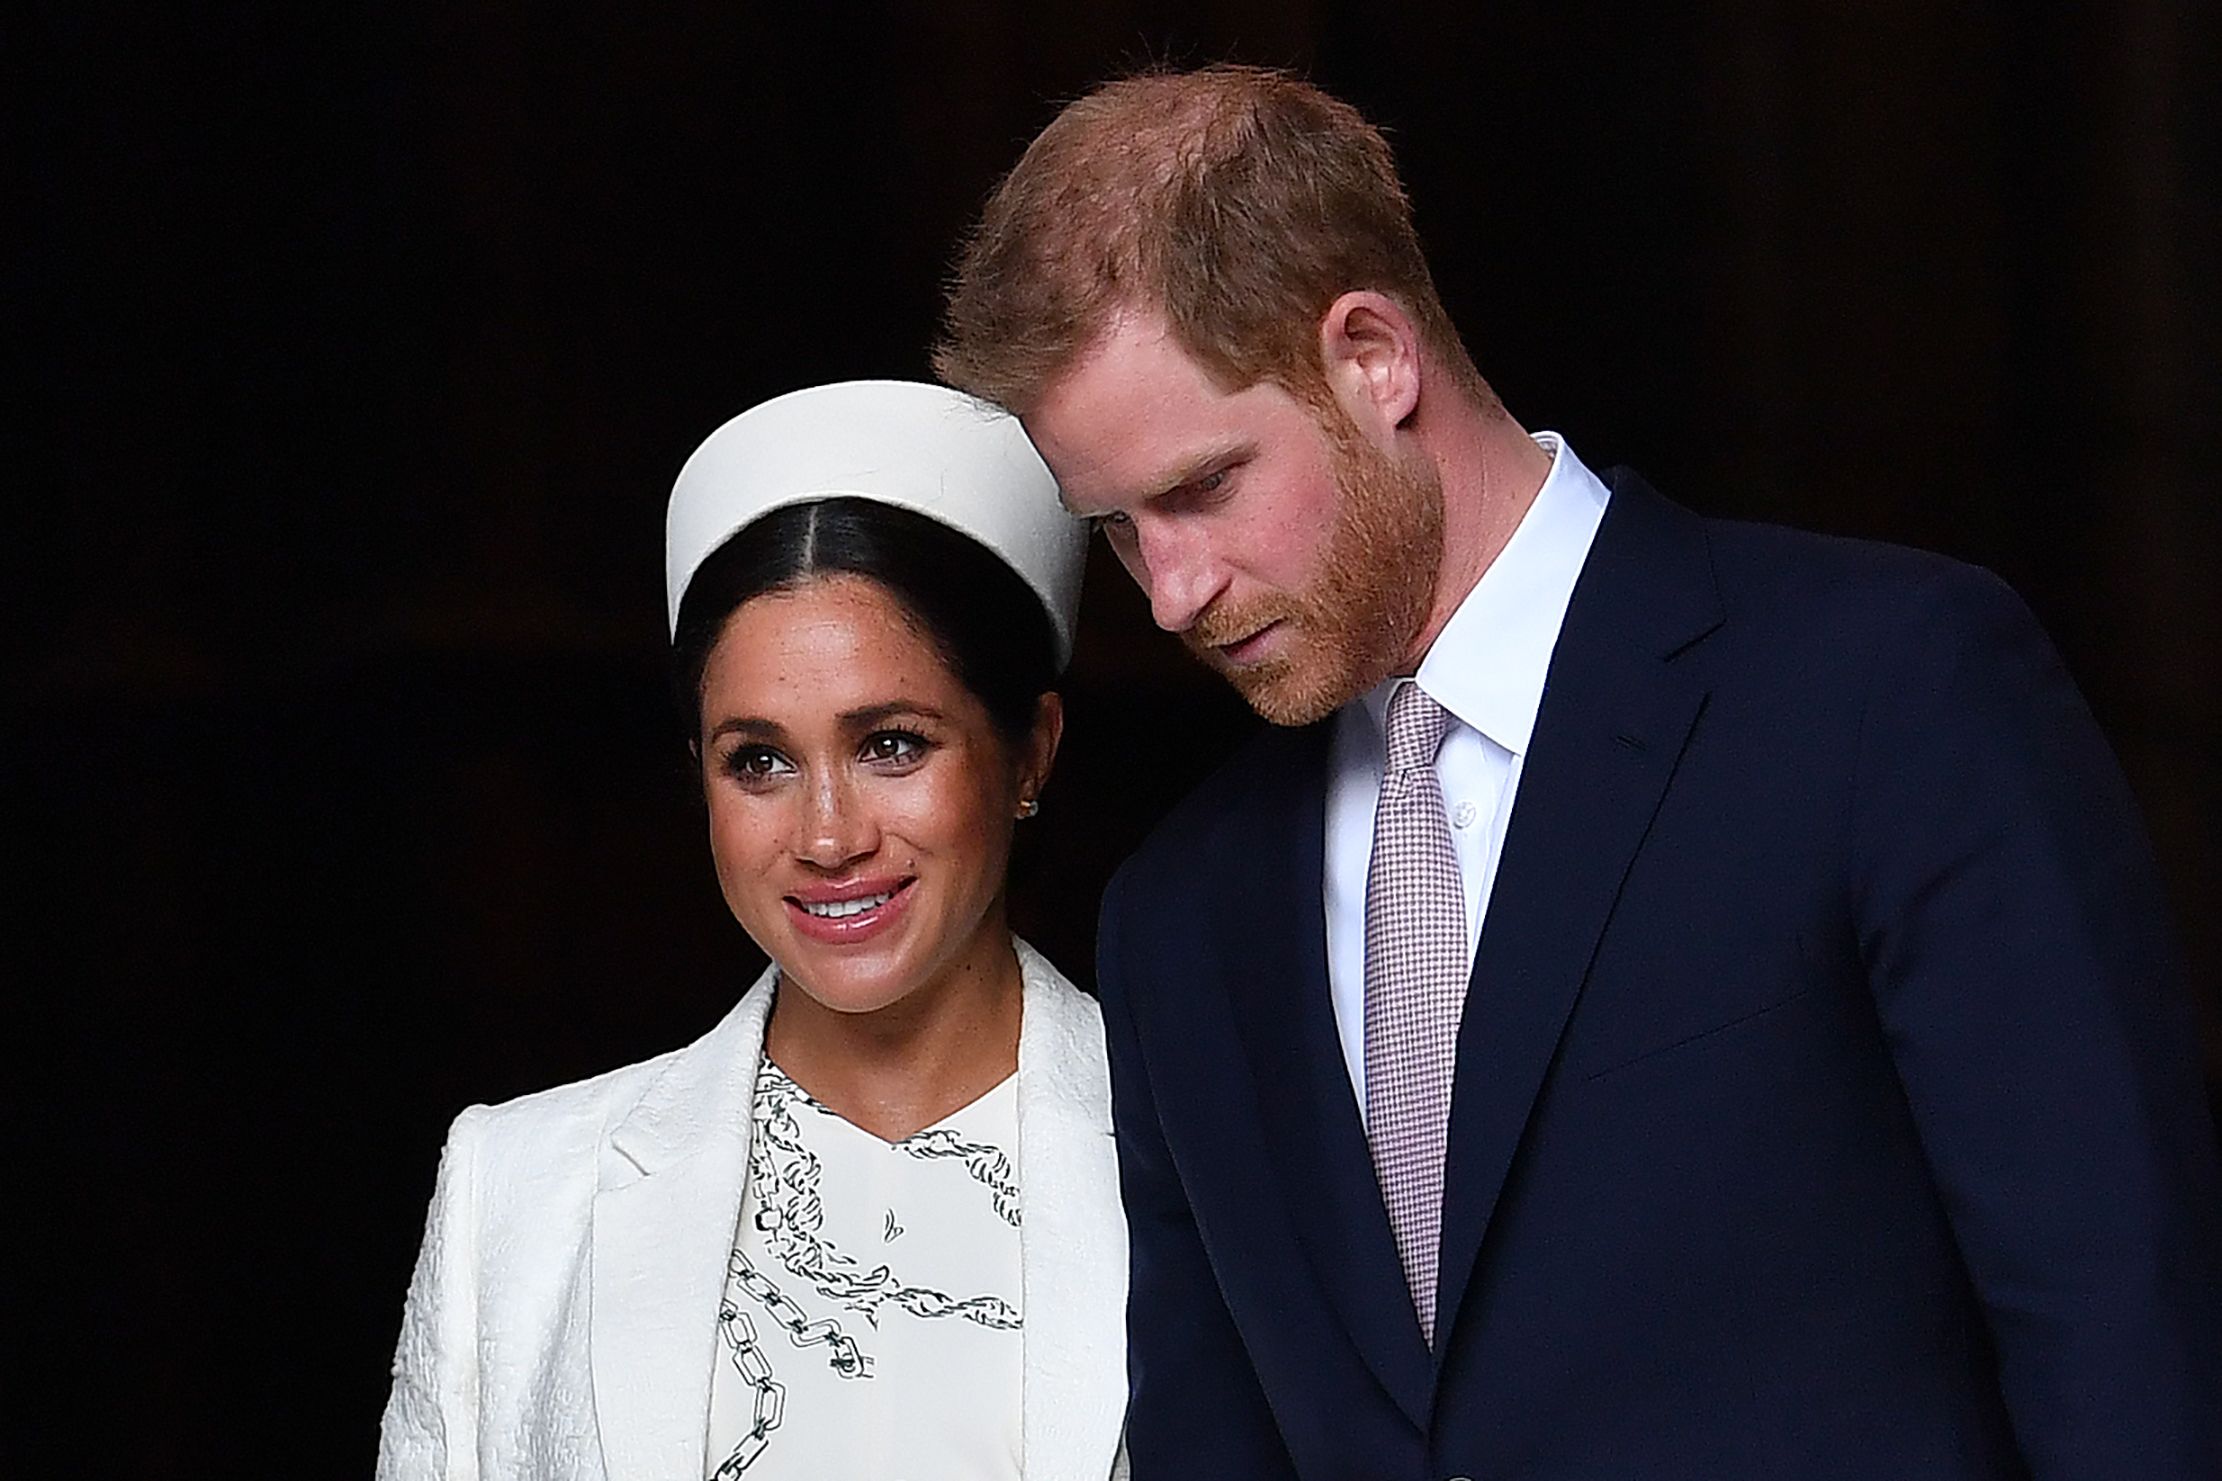 Prince Harry Could Divorce Meghan Markle For This Shocking Reason